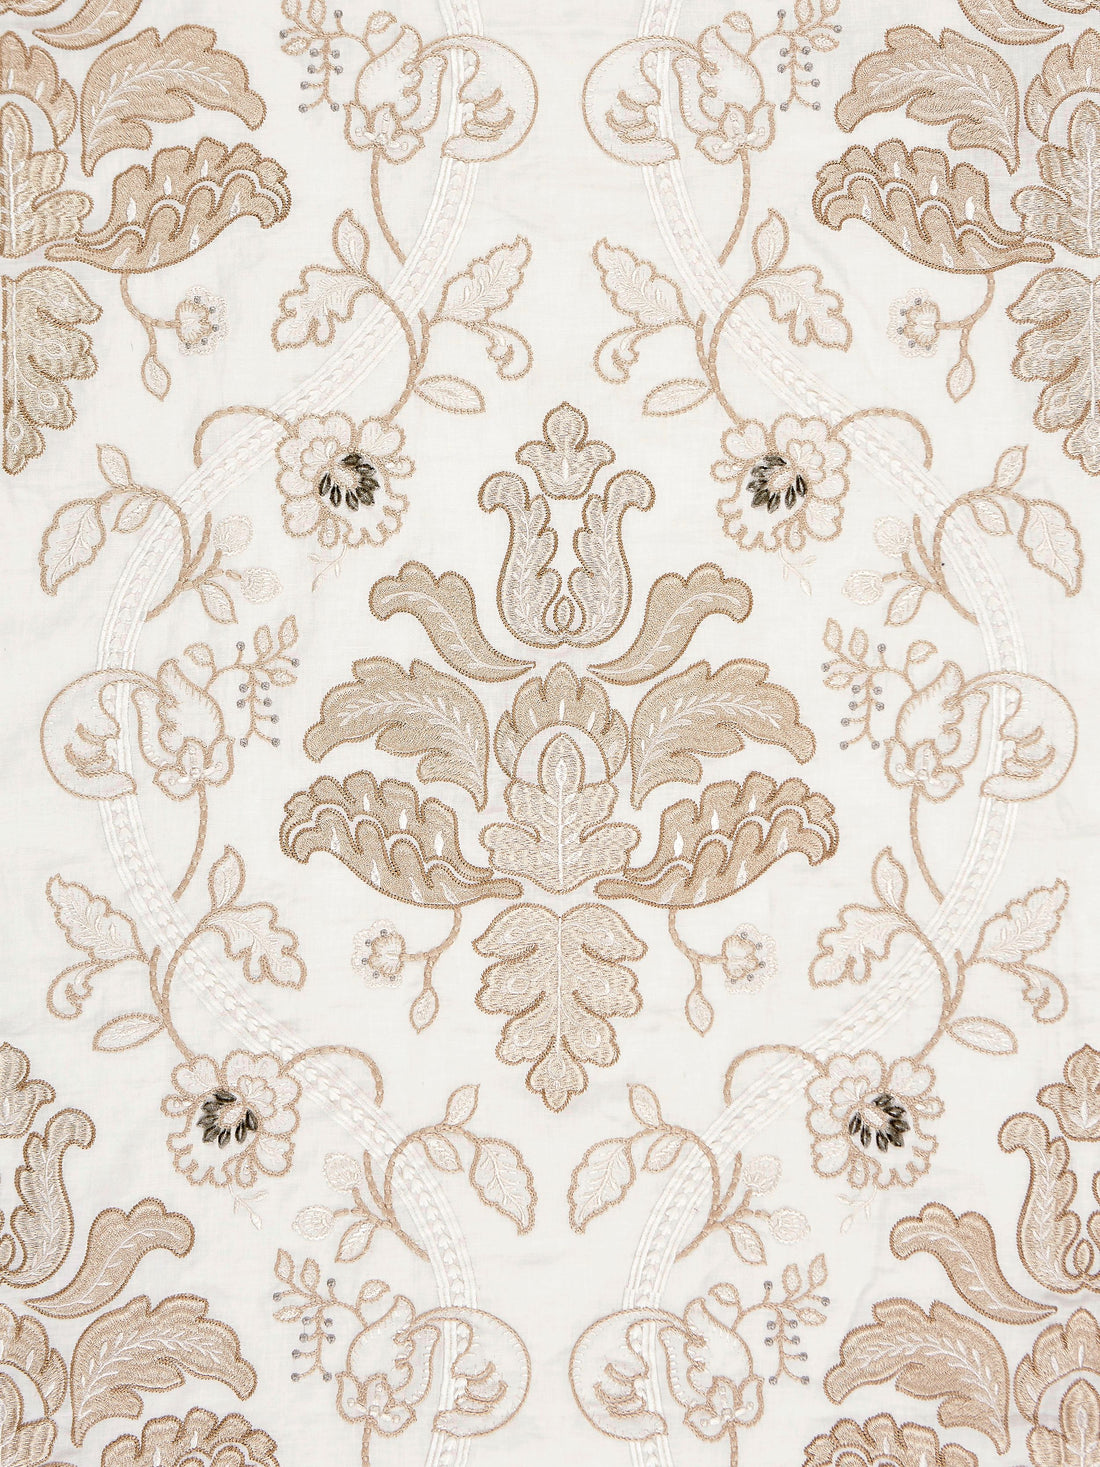 Isabella Embroidery fabric in champagne color - pattern number SC 000127033 - by Scalamandre in the Scalamandre Fabrics Book 1 collection